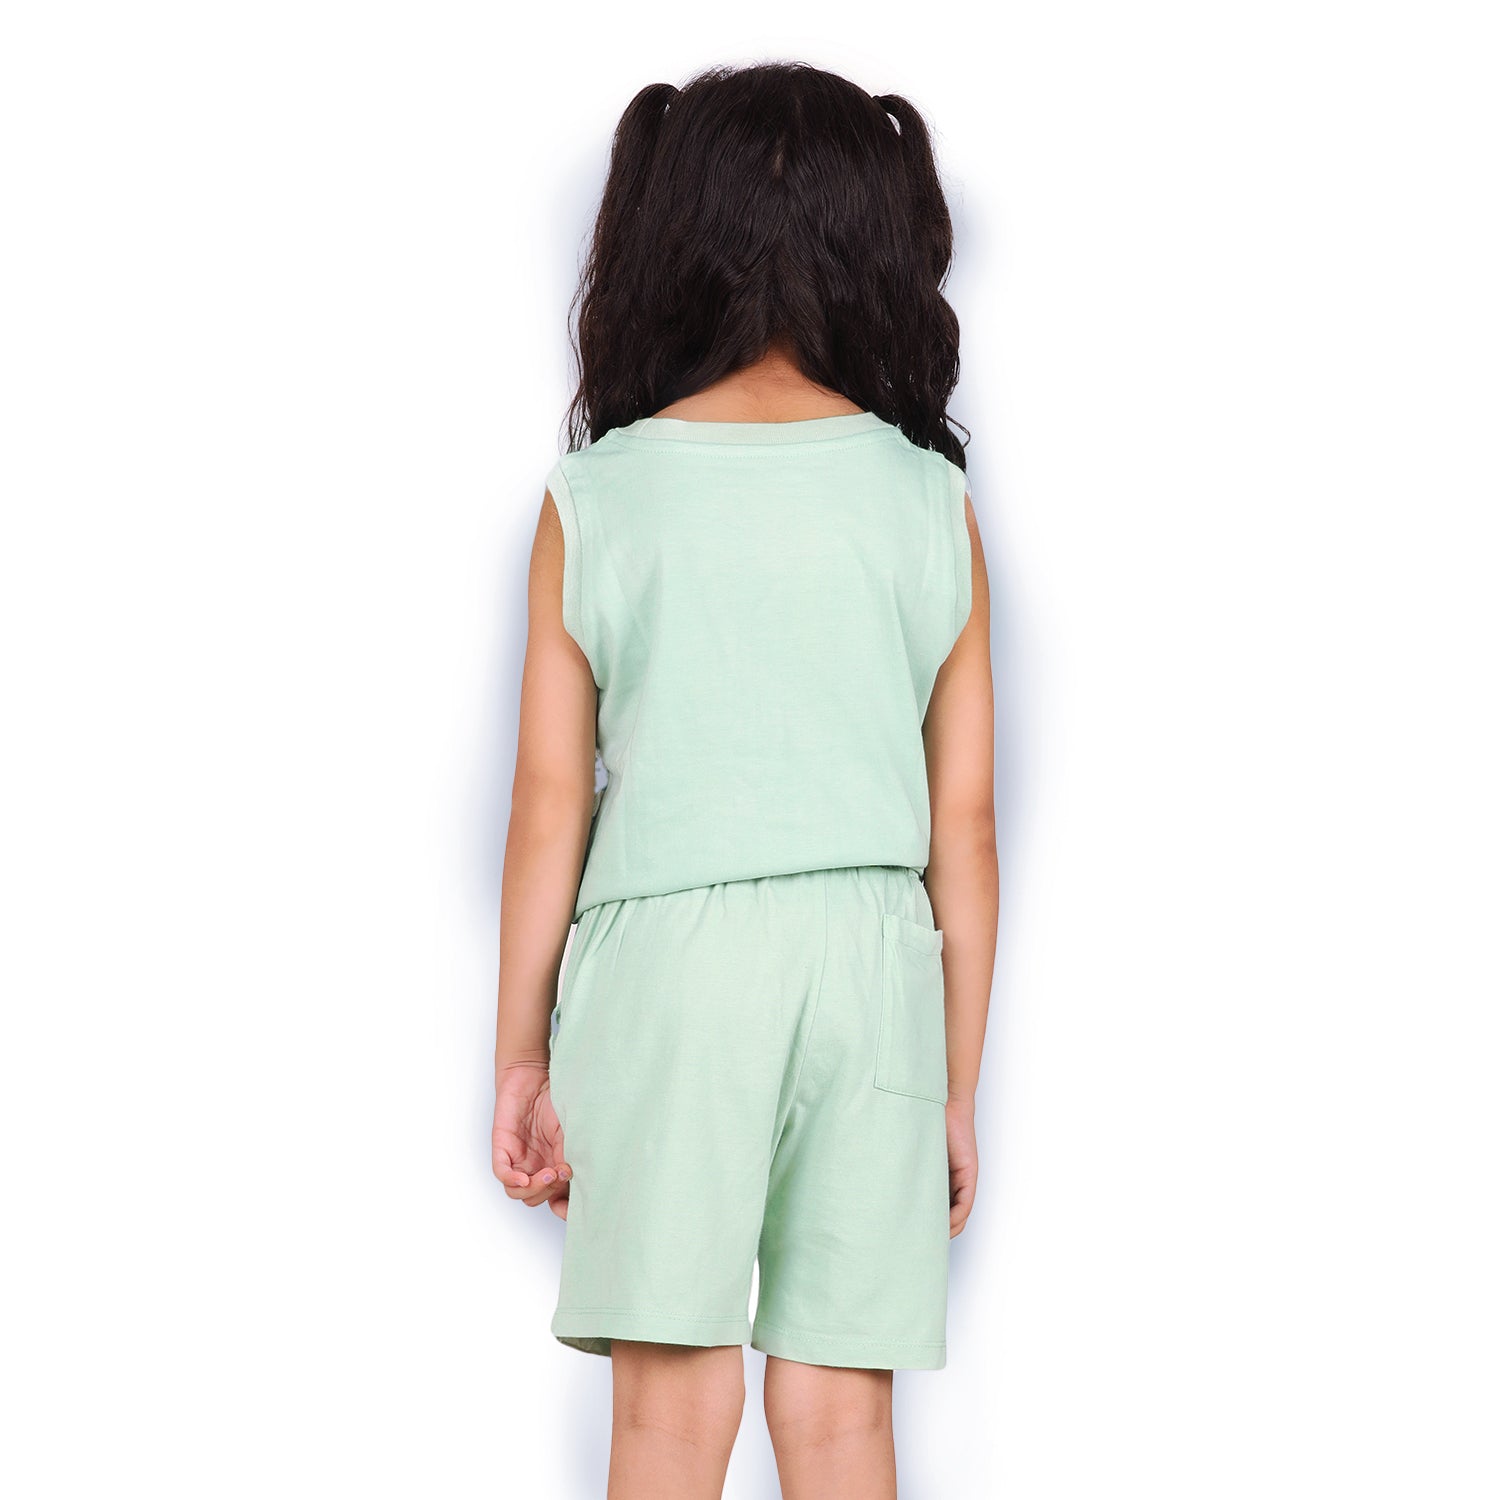 Aqua Ripple Vest with Matching Planet First Shorts Set